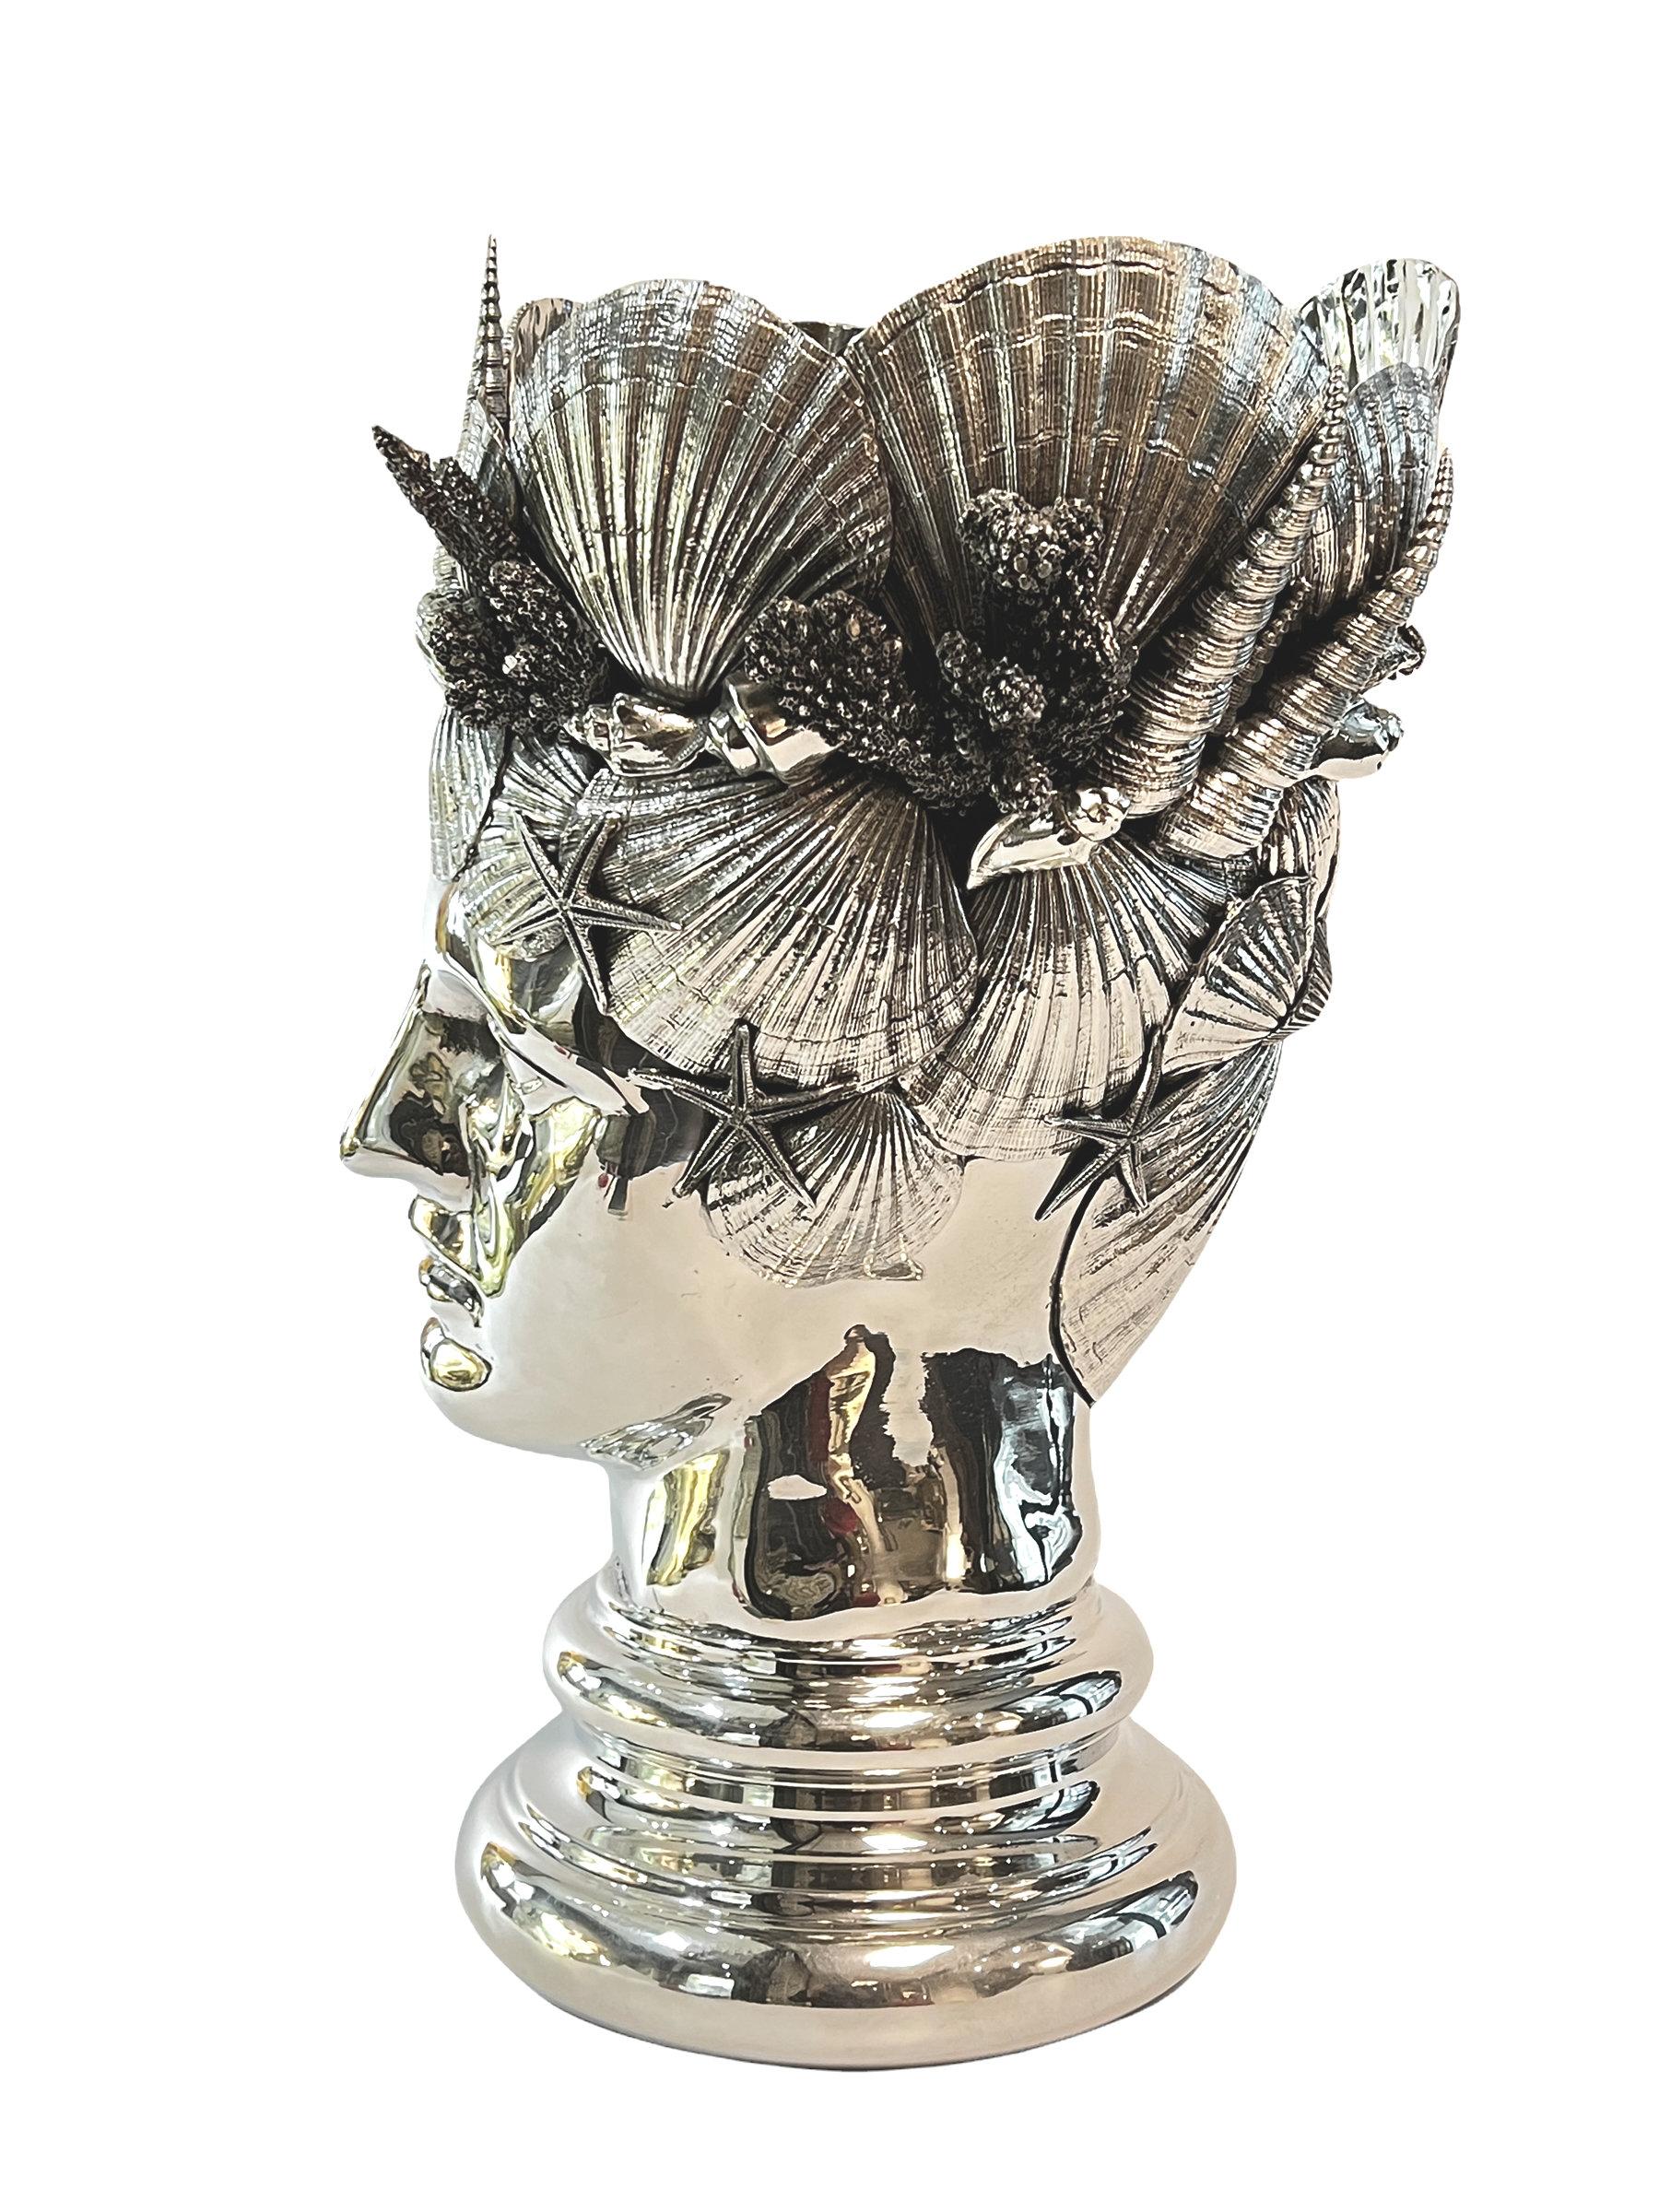 Our large silverplated pewter vase or champagne bucket depicts a male sculpted in the neoclassical style with elaborate crown of seashells and coral, inspired by the Poseidon and Neptune, gods of the sea from Greek and Roman mythology. In excellent